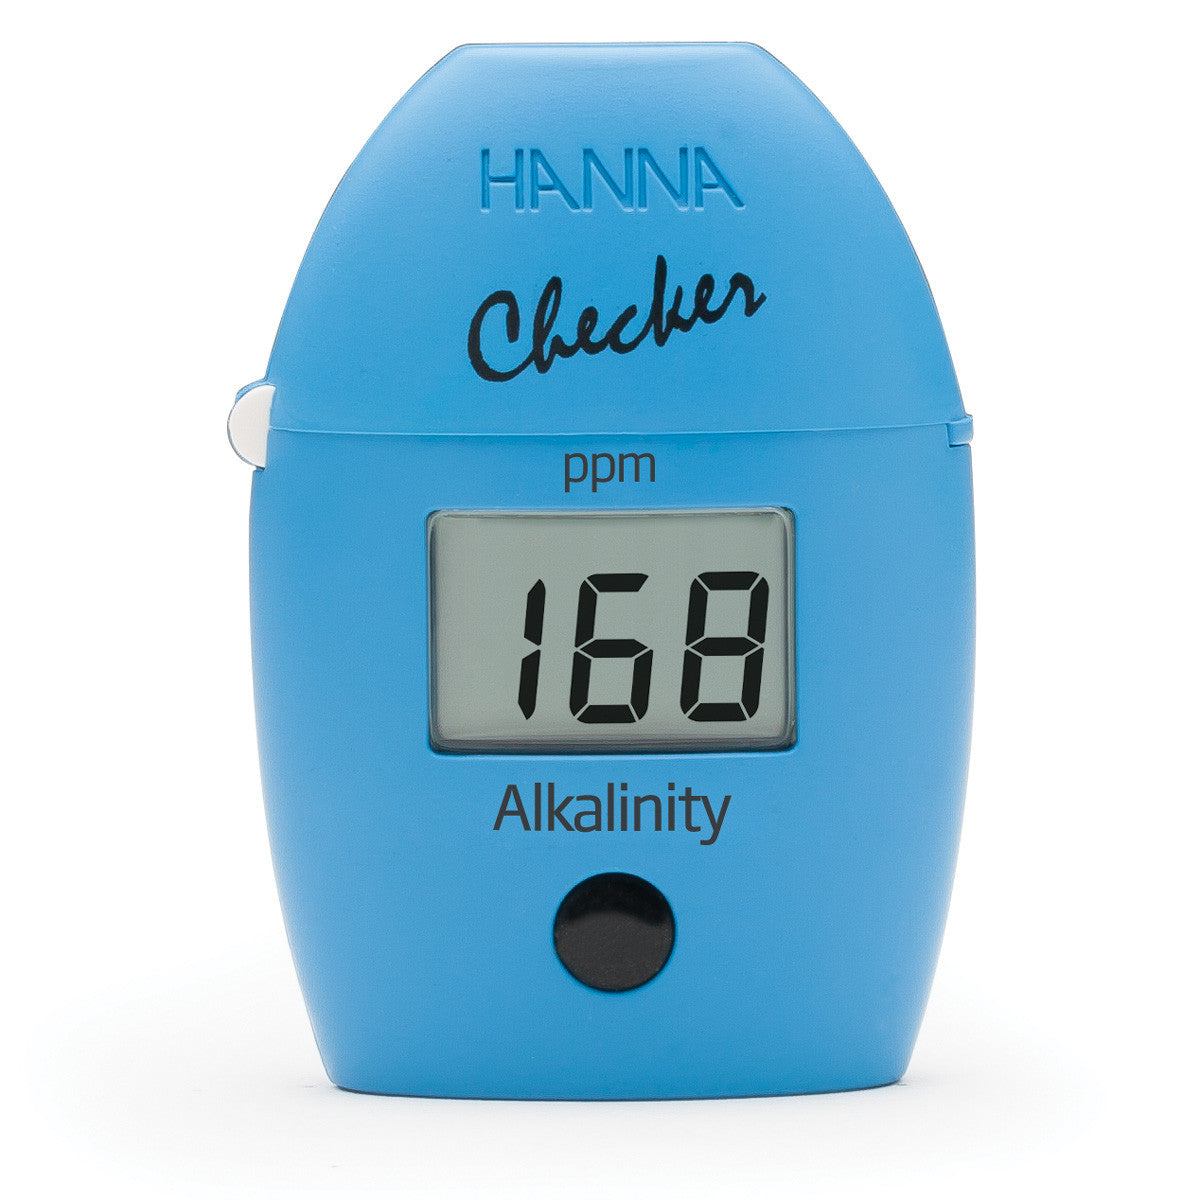 TAS Alkalinity Checker HC is a chemical test kit specifically designed to measure alkalinity levels in fresh water. With its precise and accurate results, this alkalinity checker ensures that your water maintains a healthy blue color.